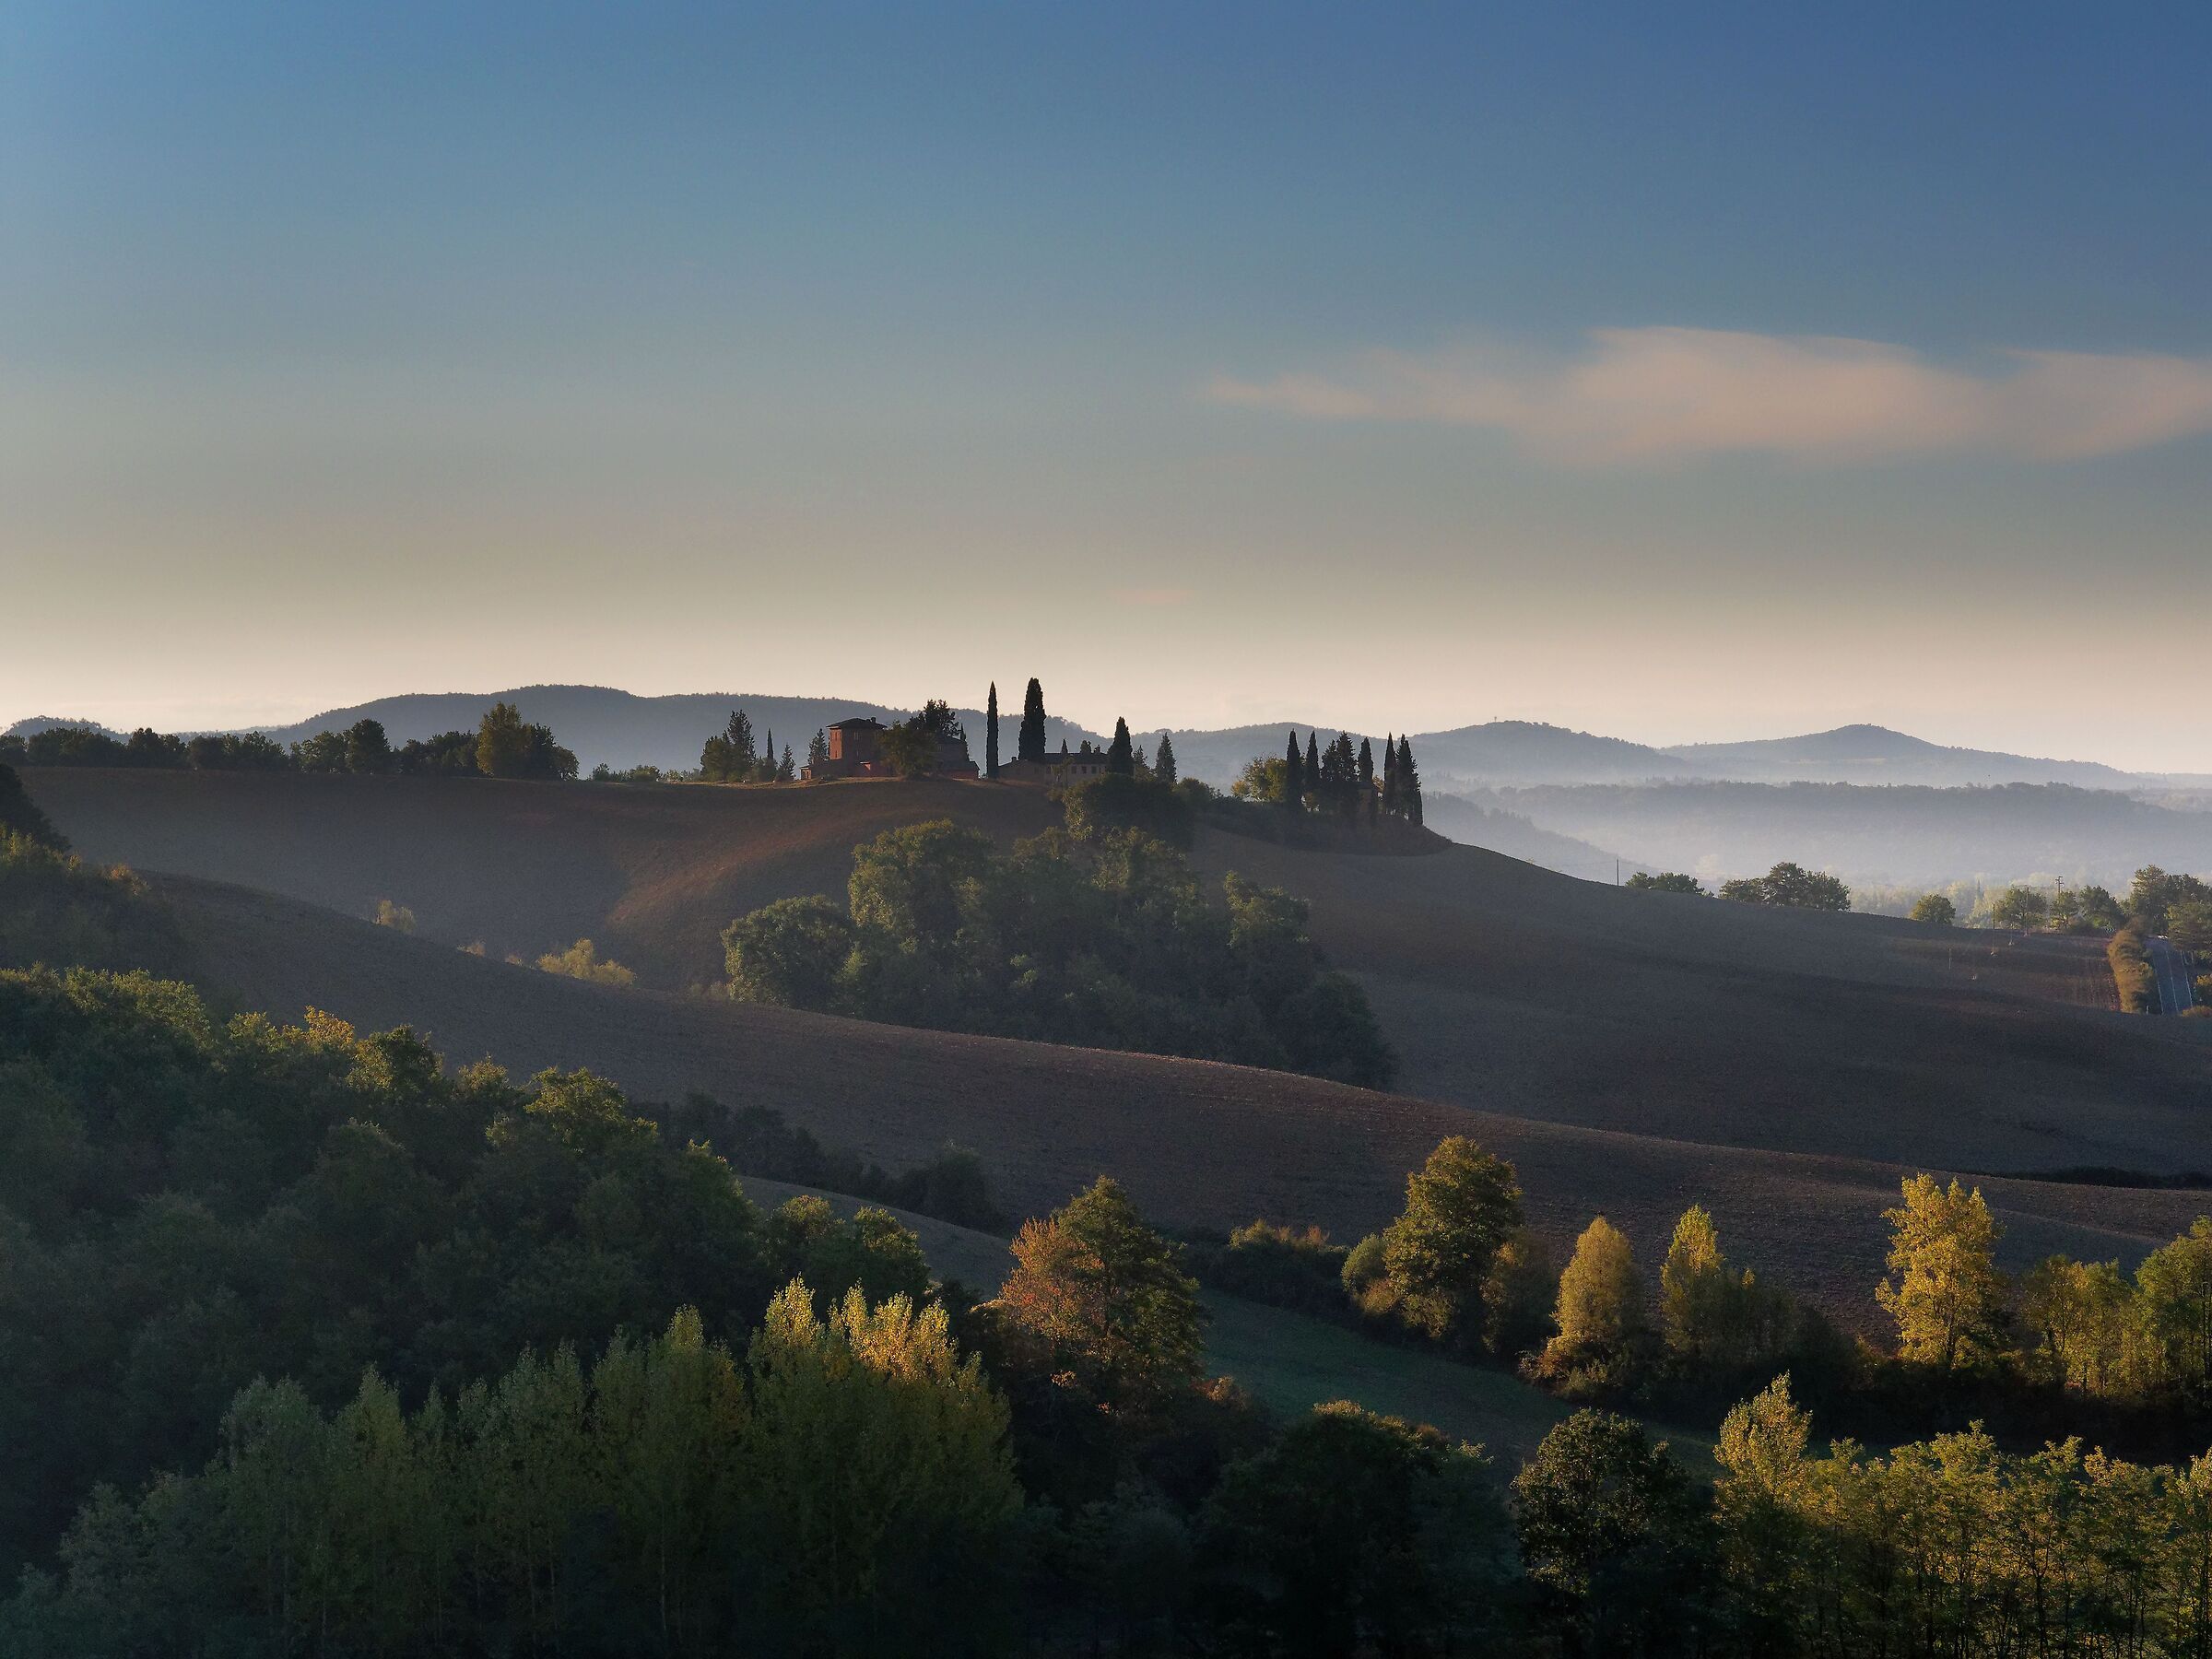 The first light that warms the Sienese hills...